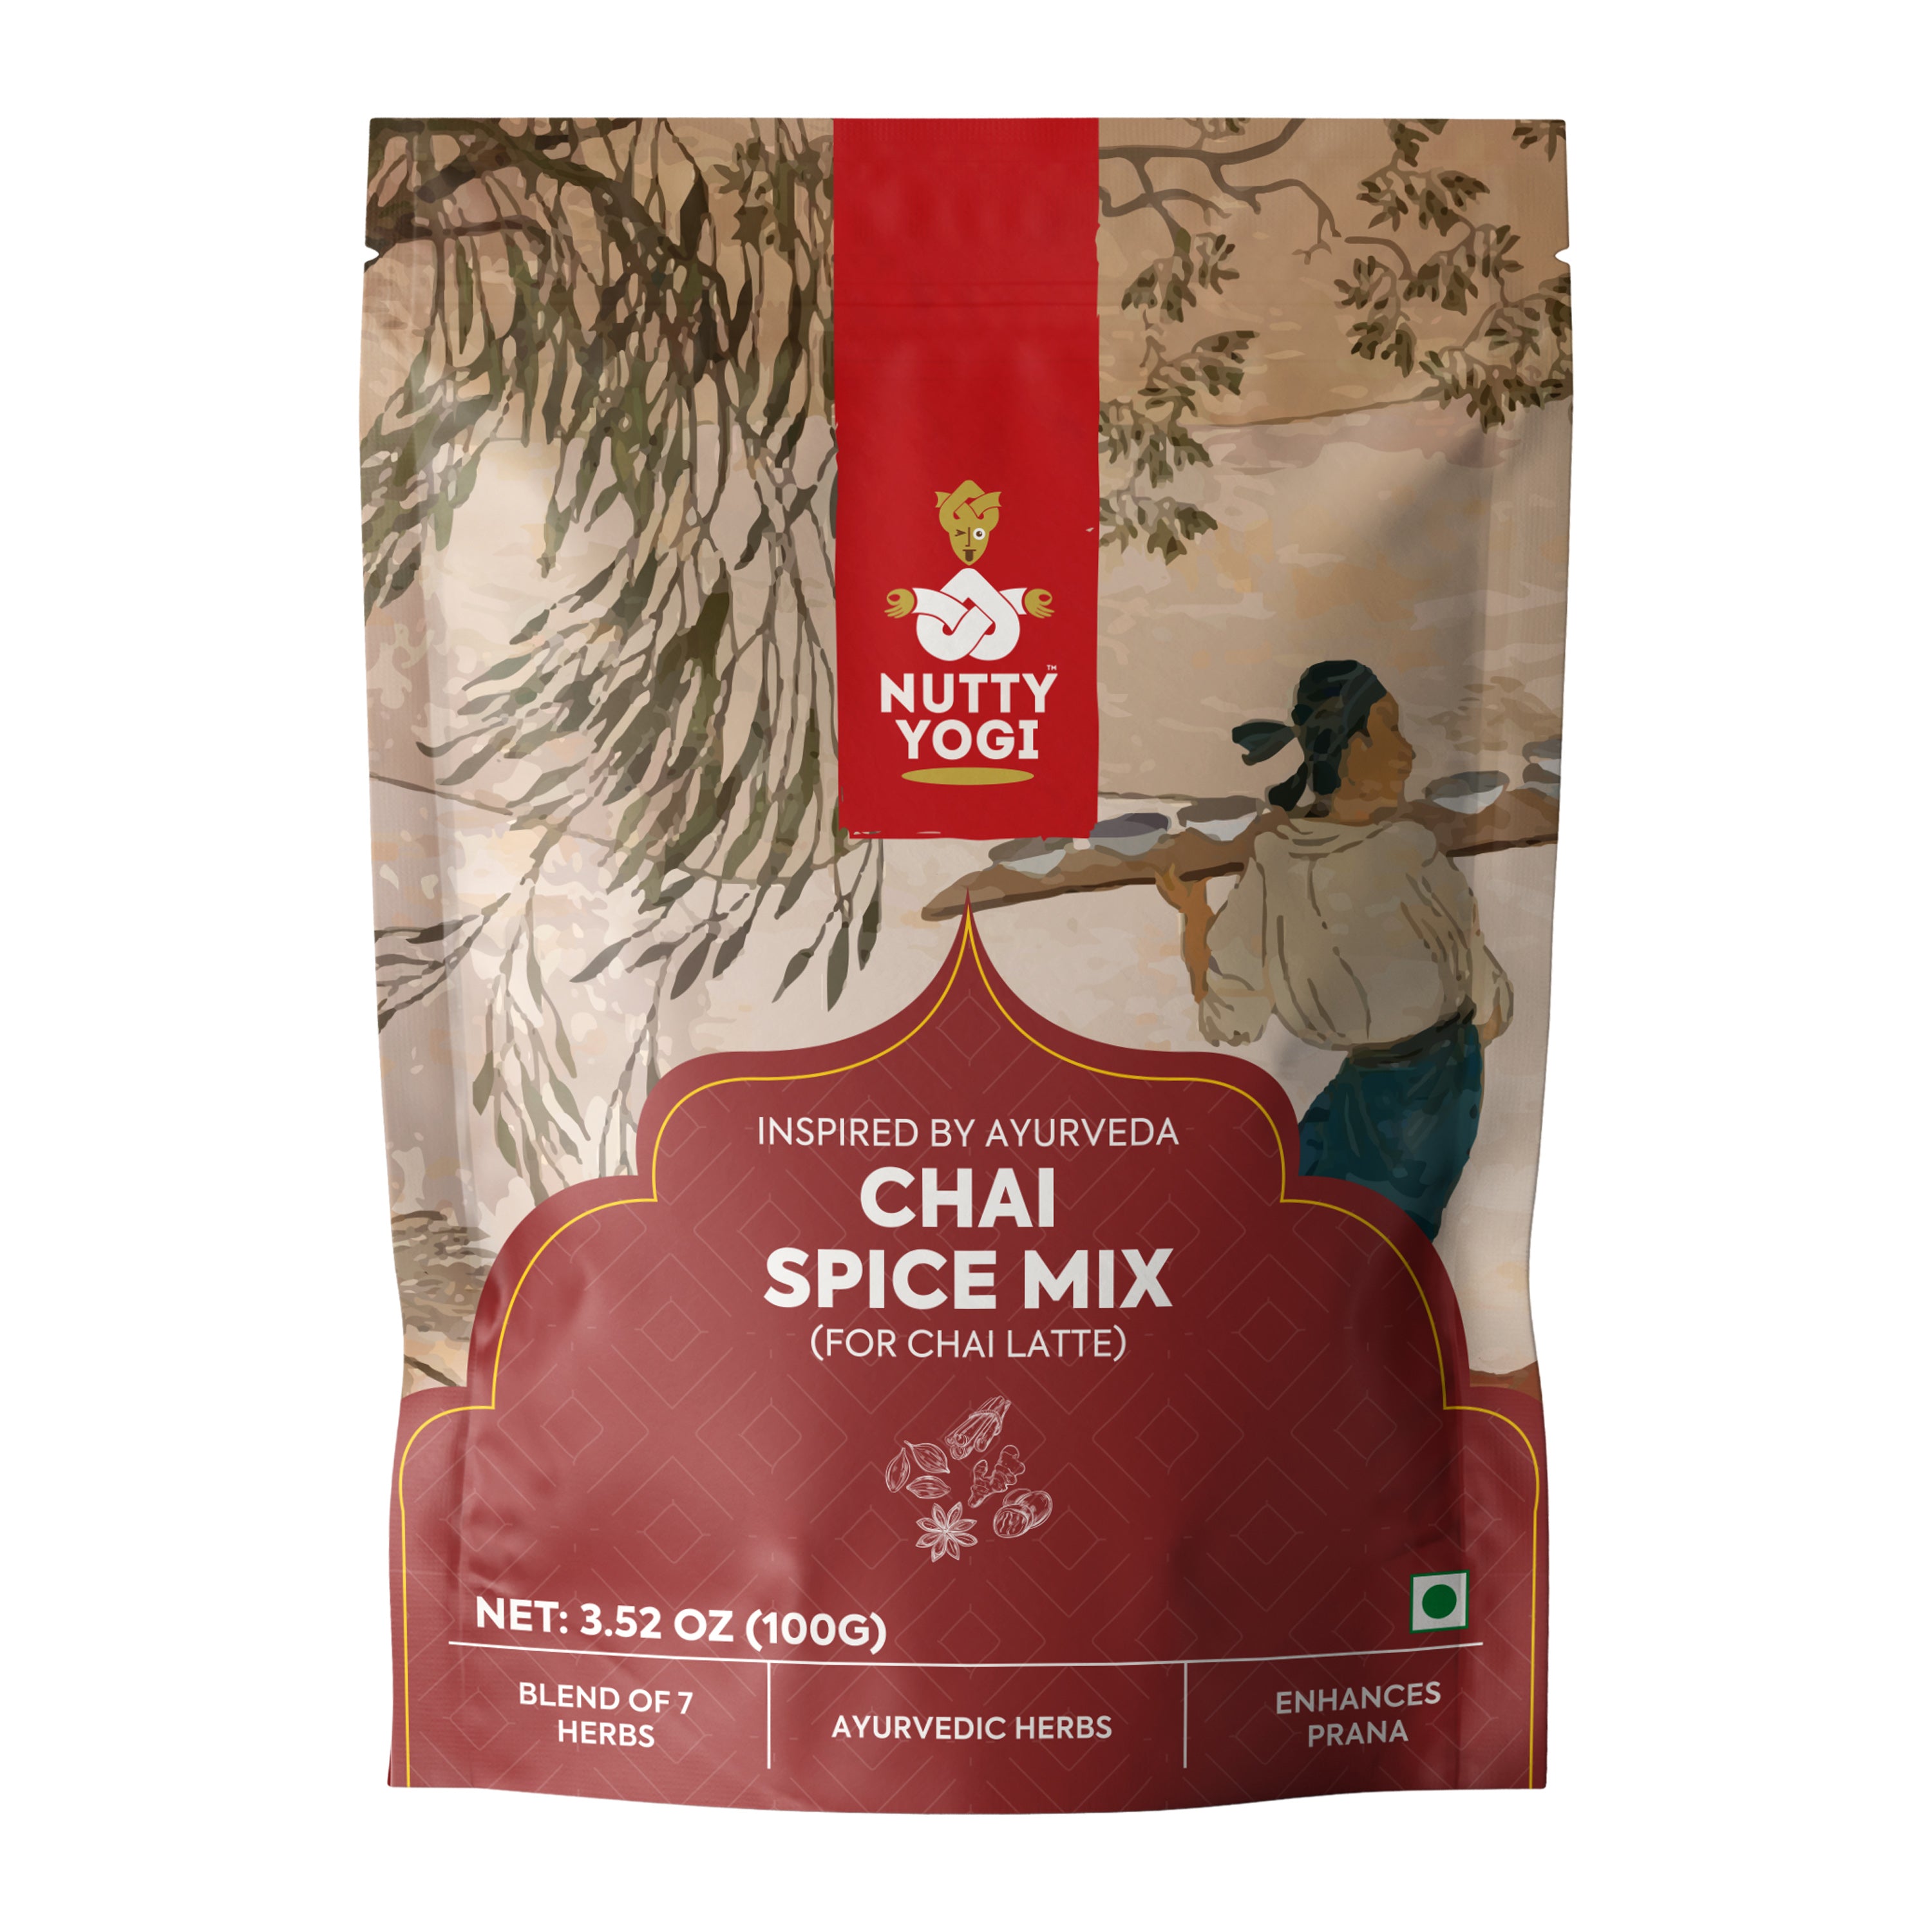 Nutty Yogi ChaiSpice Mix 100g | Aromatic Tea Masala Powder with 100% Natural Ingredients